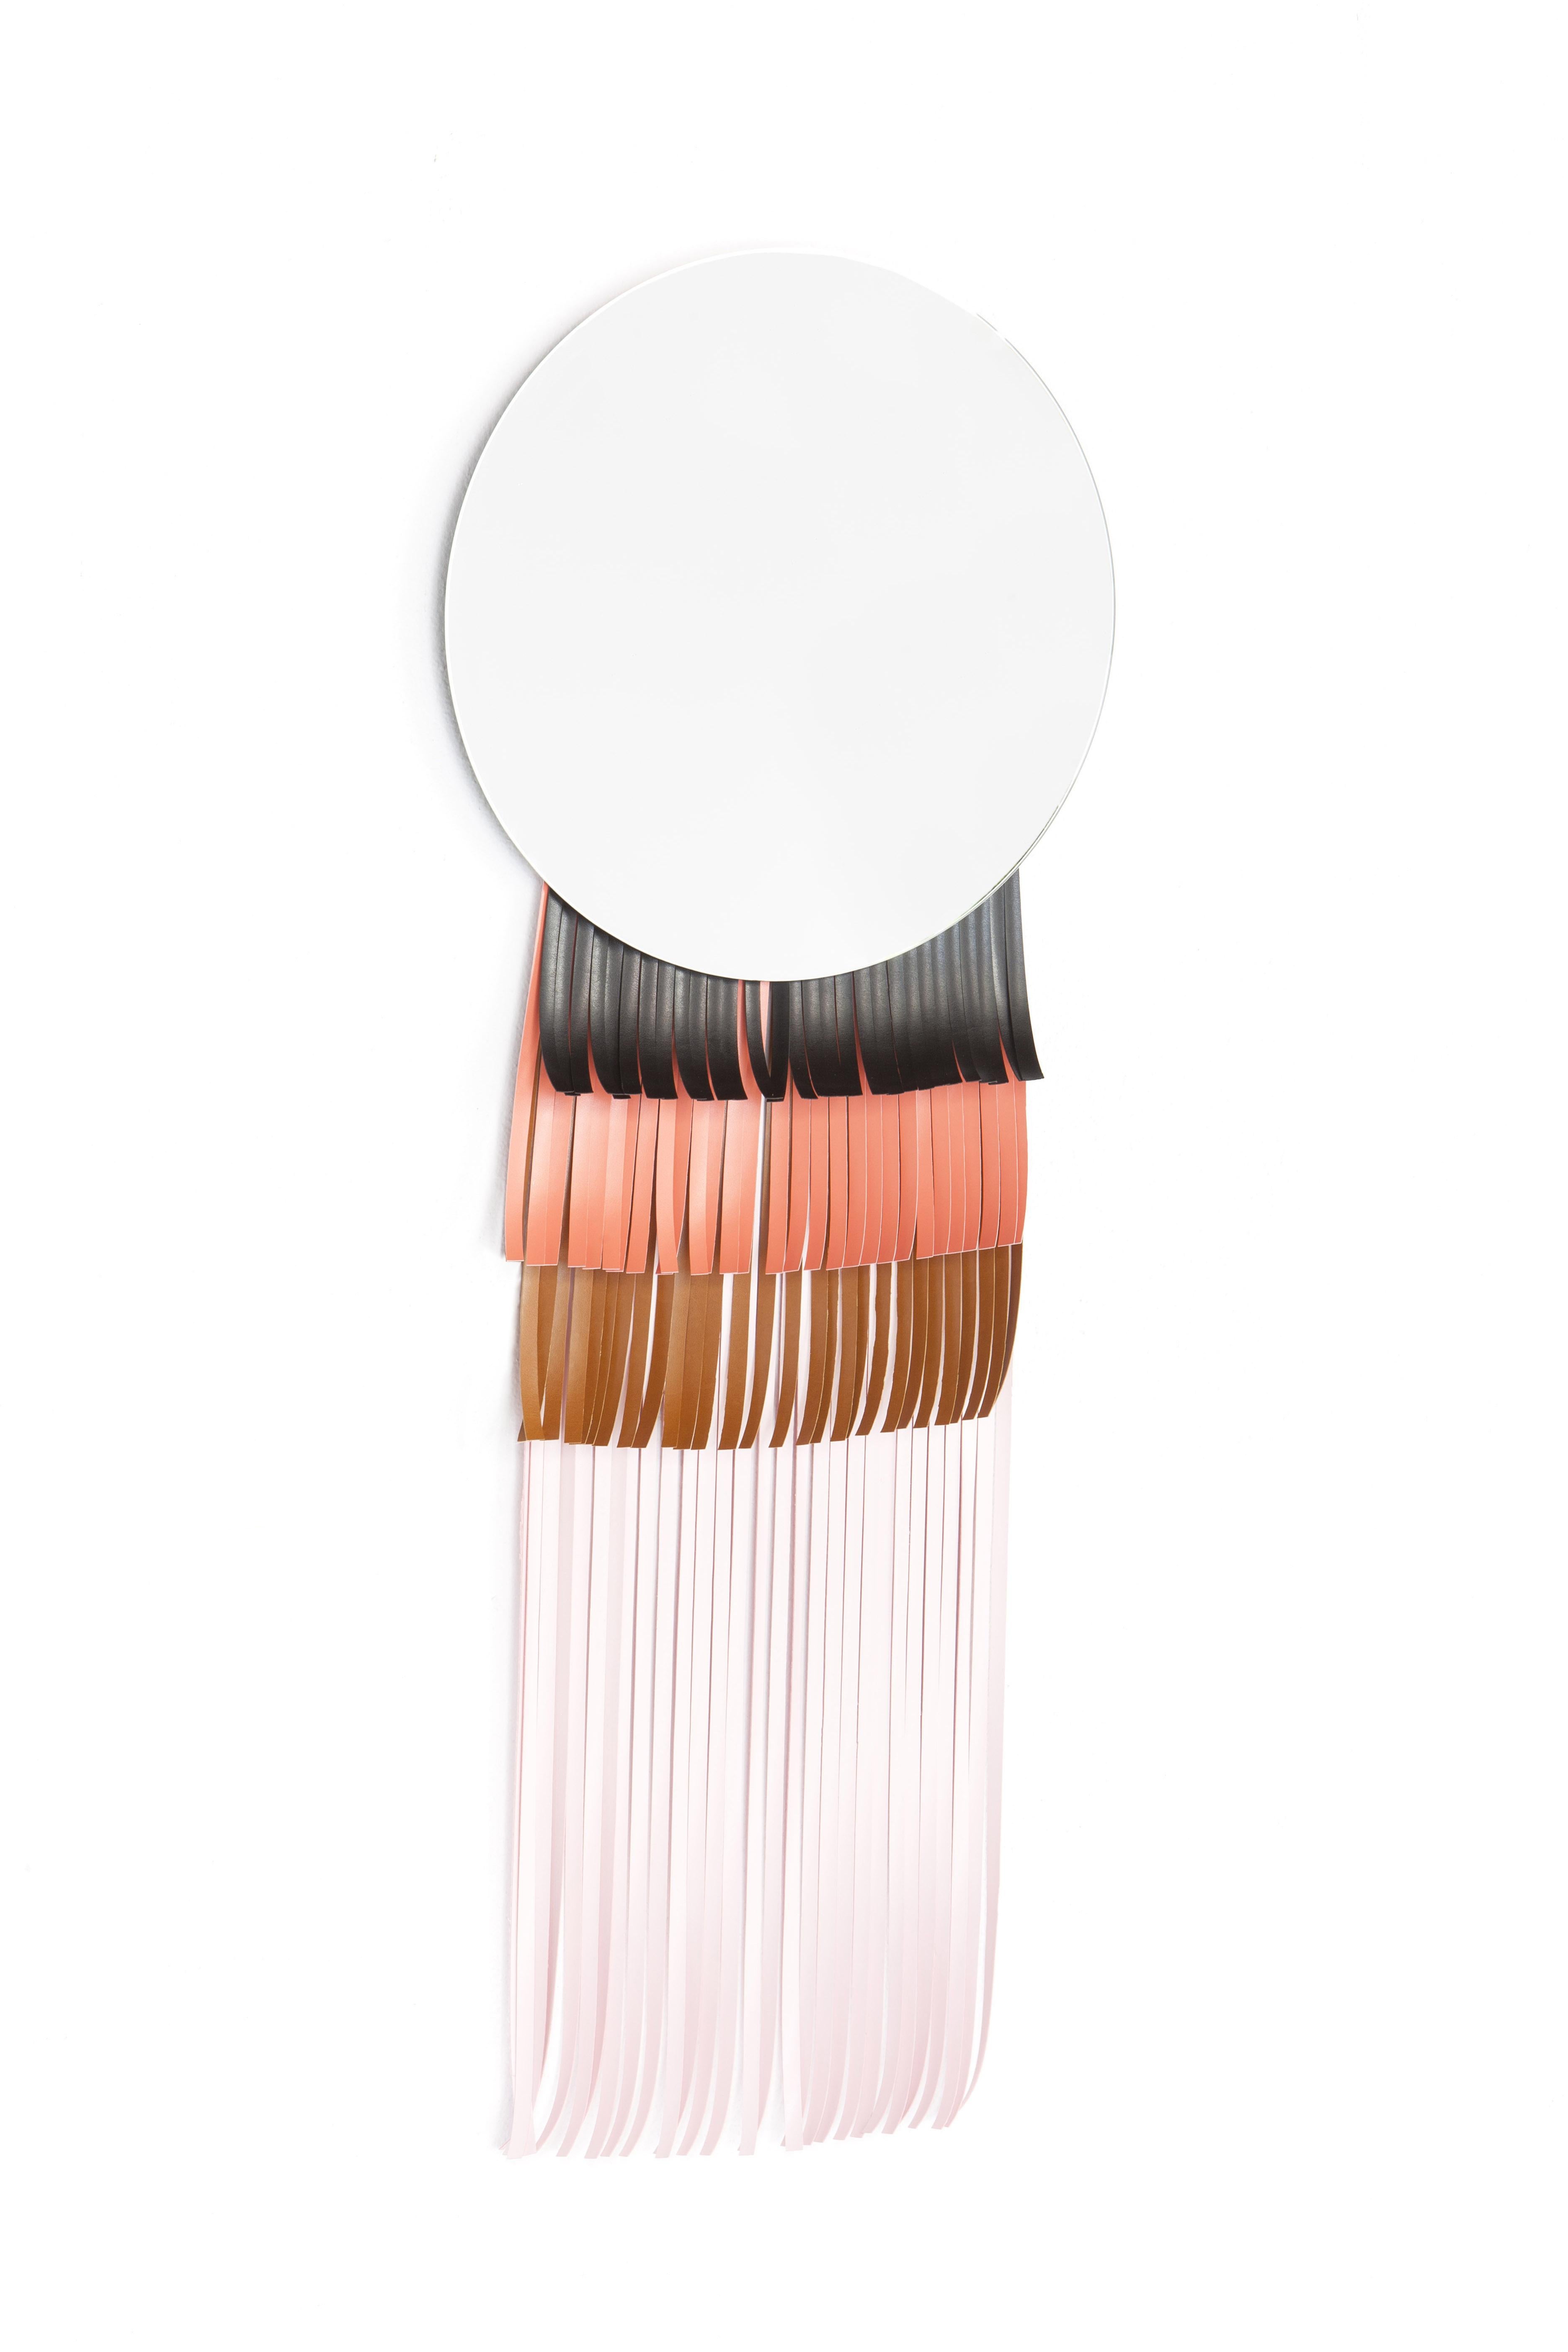 Masai round mirror by Serena Confalonieri
Dimensions: diameter 42 cm
Fringe length: 80 cm
Materials: Mirror and faux leather decorations
Faux leather colors: Black, salmon, natural brown and pink

Round mirror with faux leather